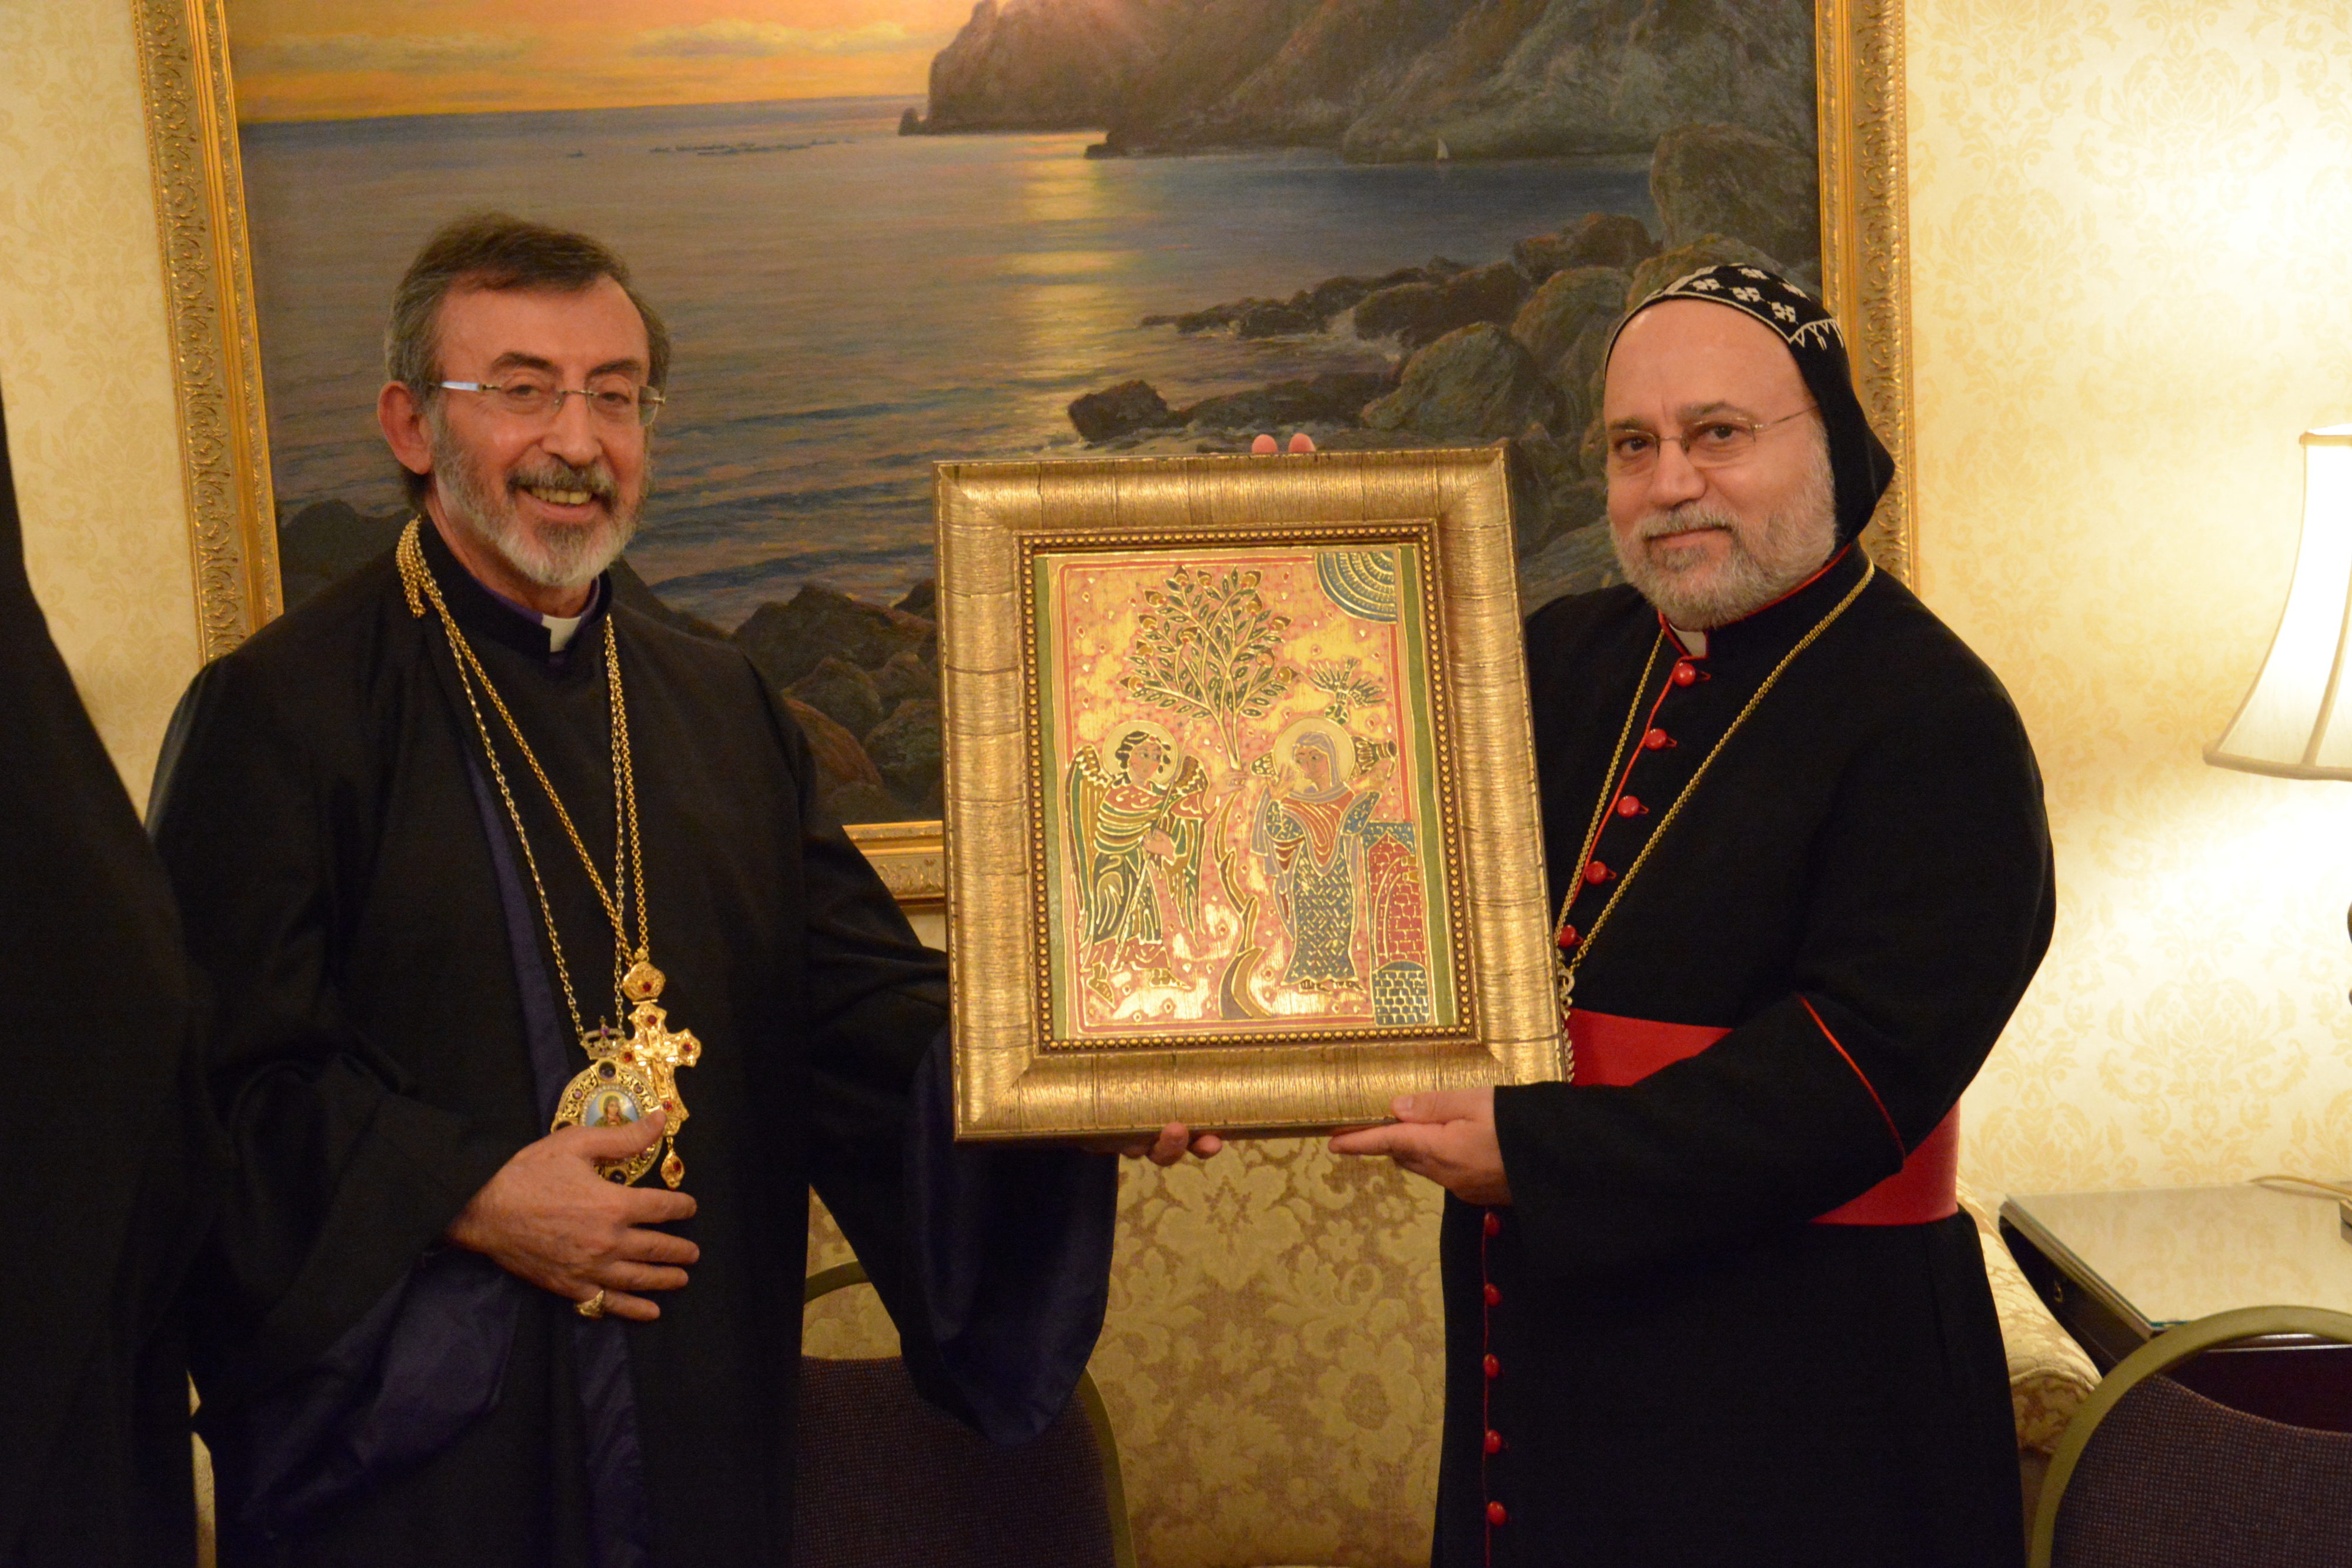 His Eminence Honored by the Armenian Orthodox Archdiocese Syriac